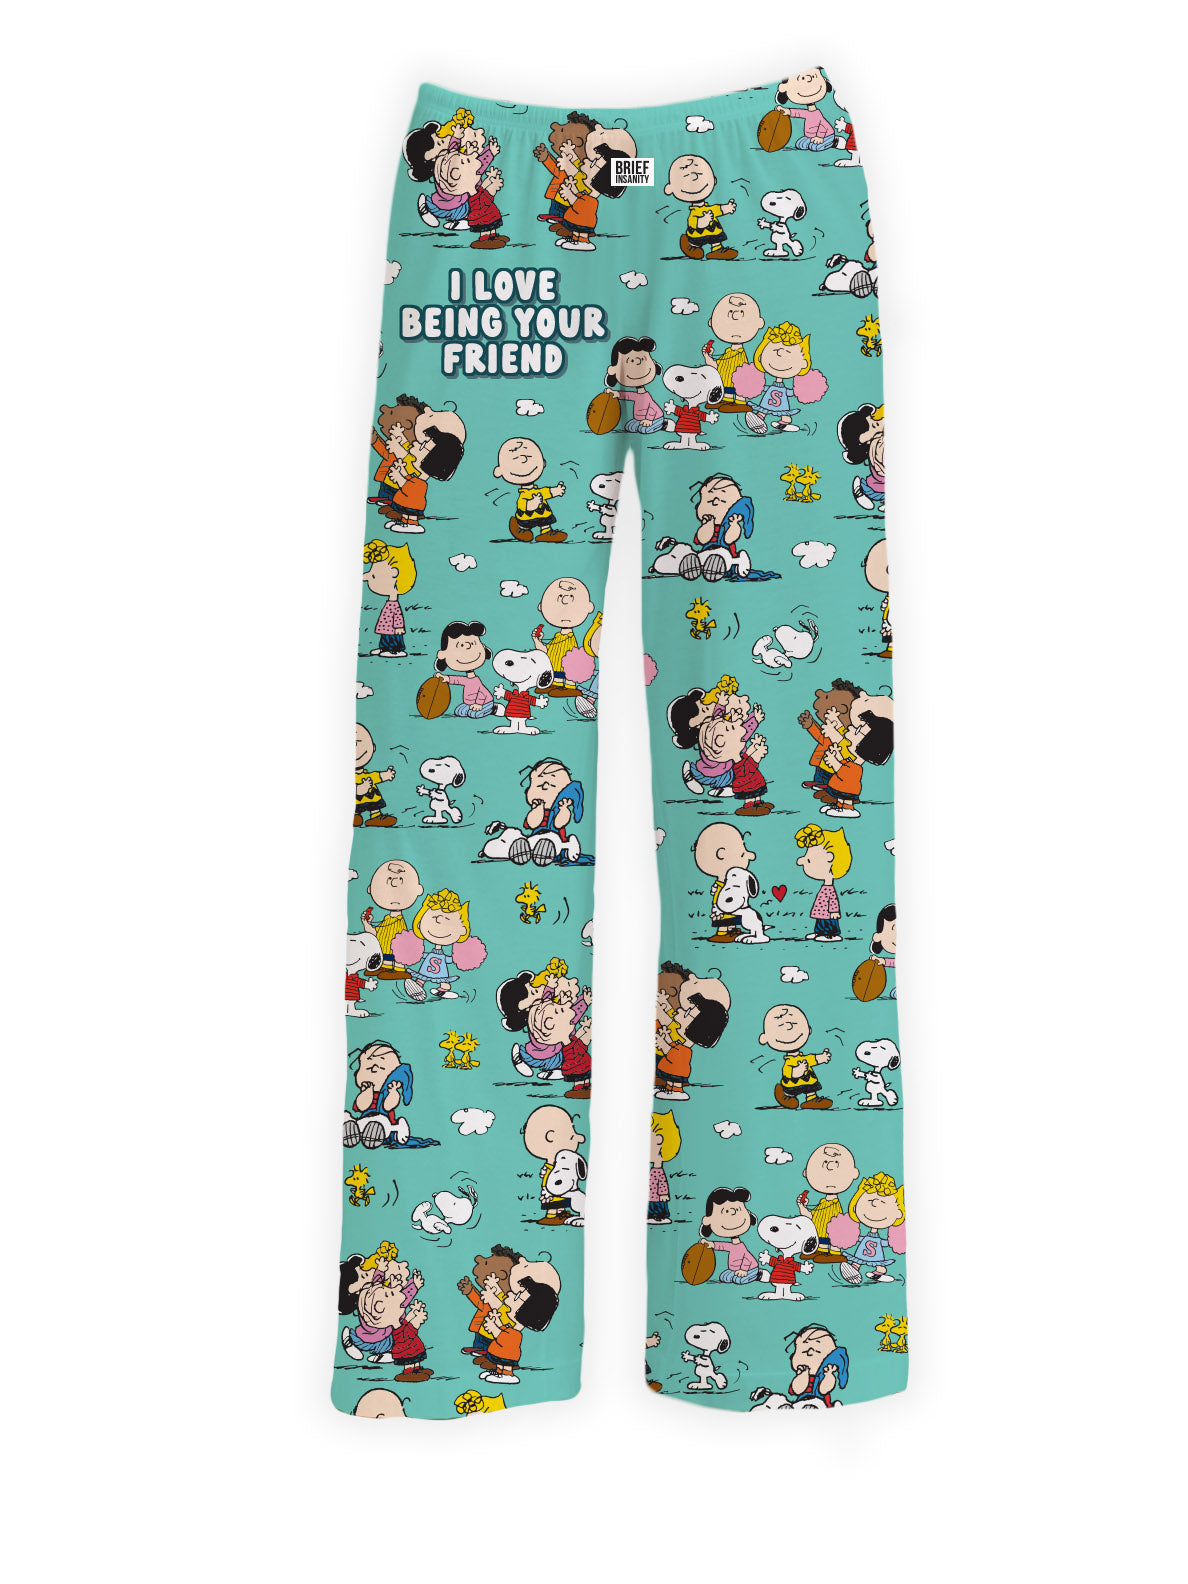 BRIEF INSANITY's I Love Being Your Friend Peanuts Pajama Lounge Pants